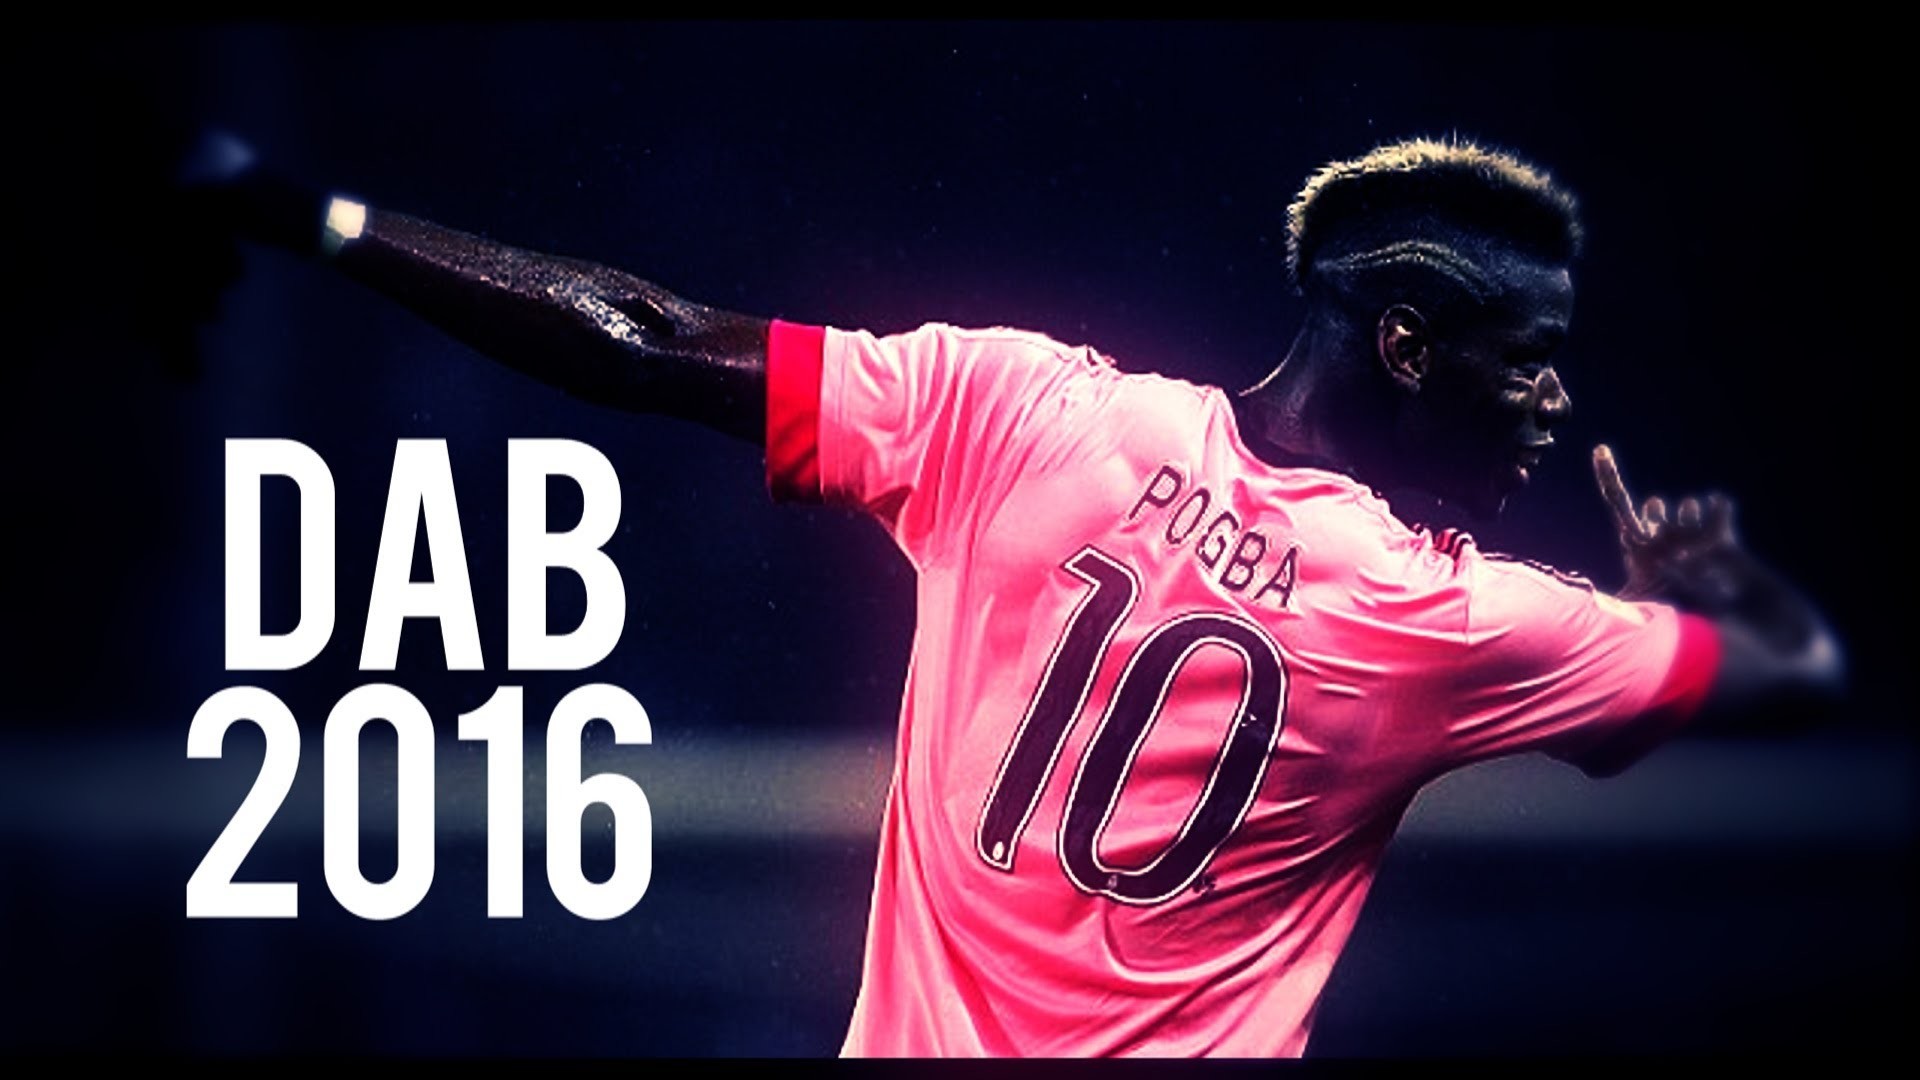 1920x1080 Paul Pogba Wallpapers, Images, Wallpapers of Paul Pogba in High .